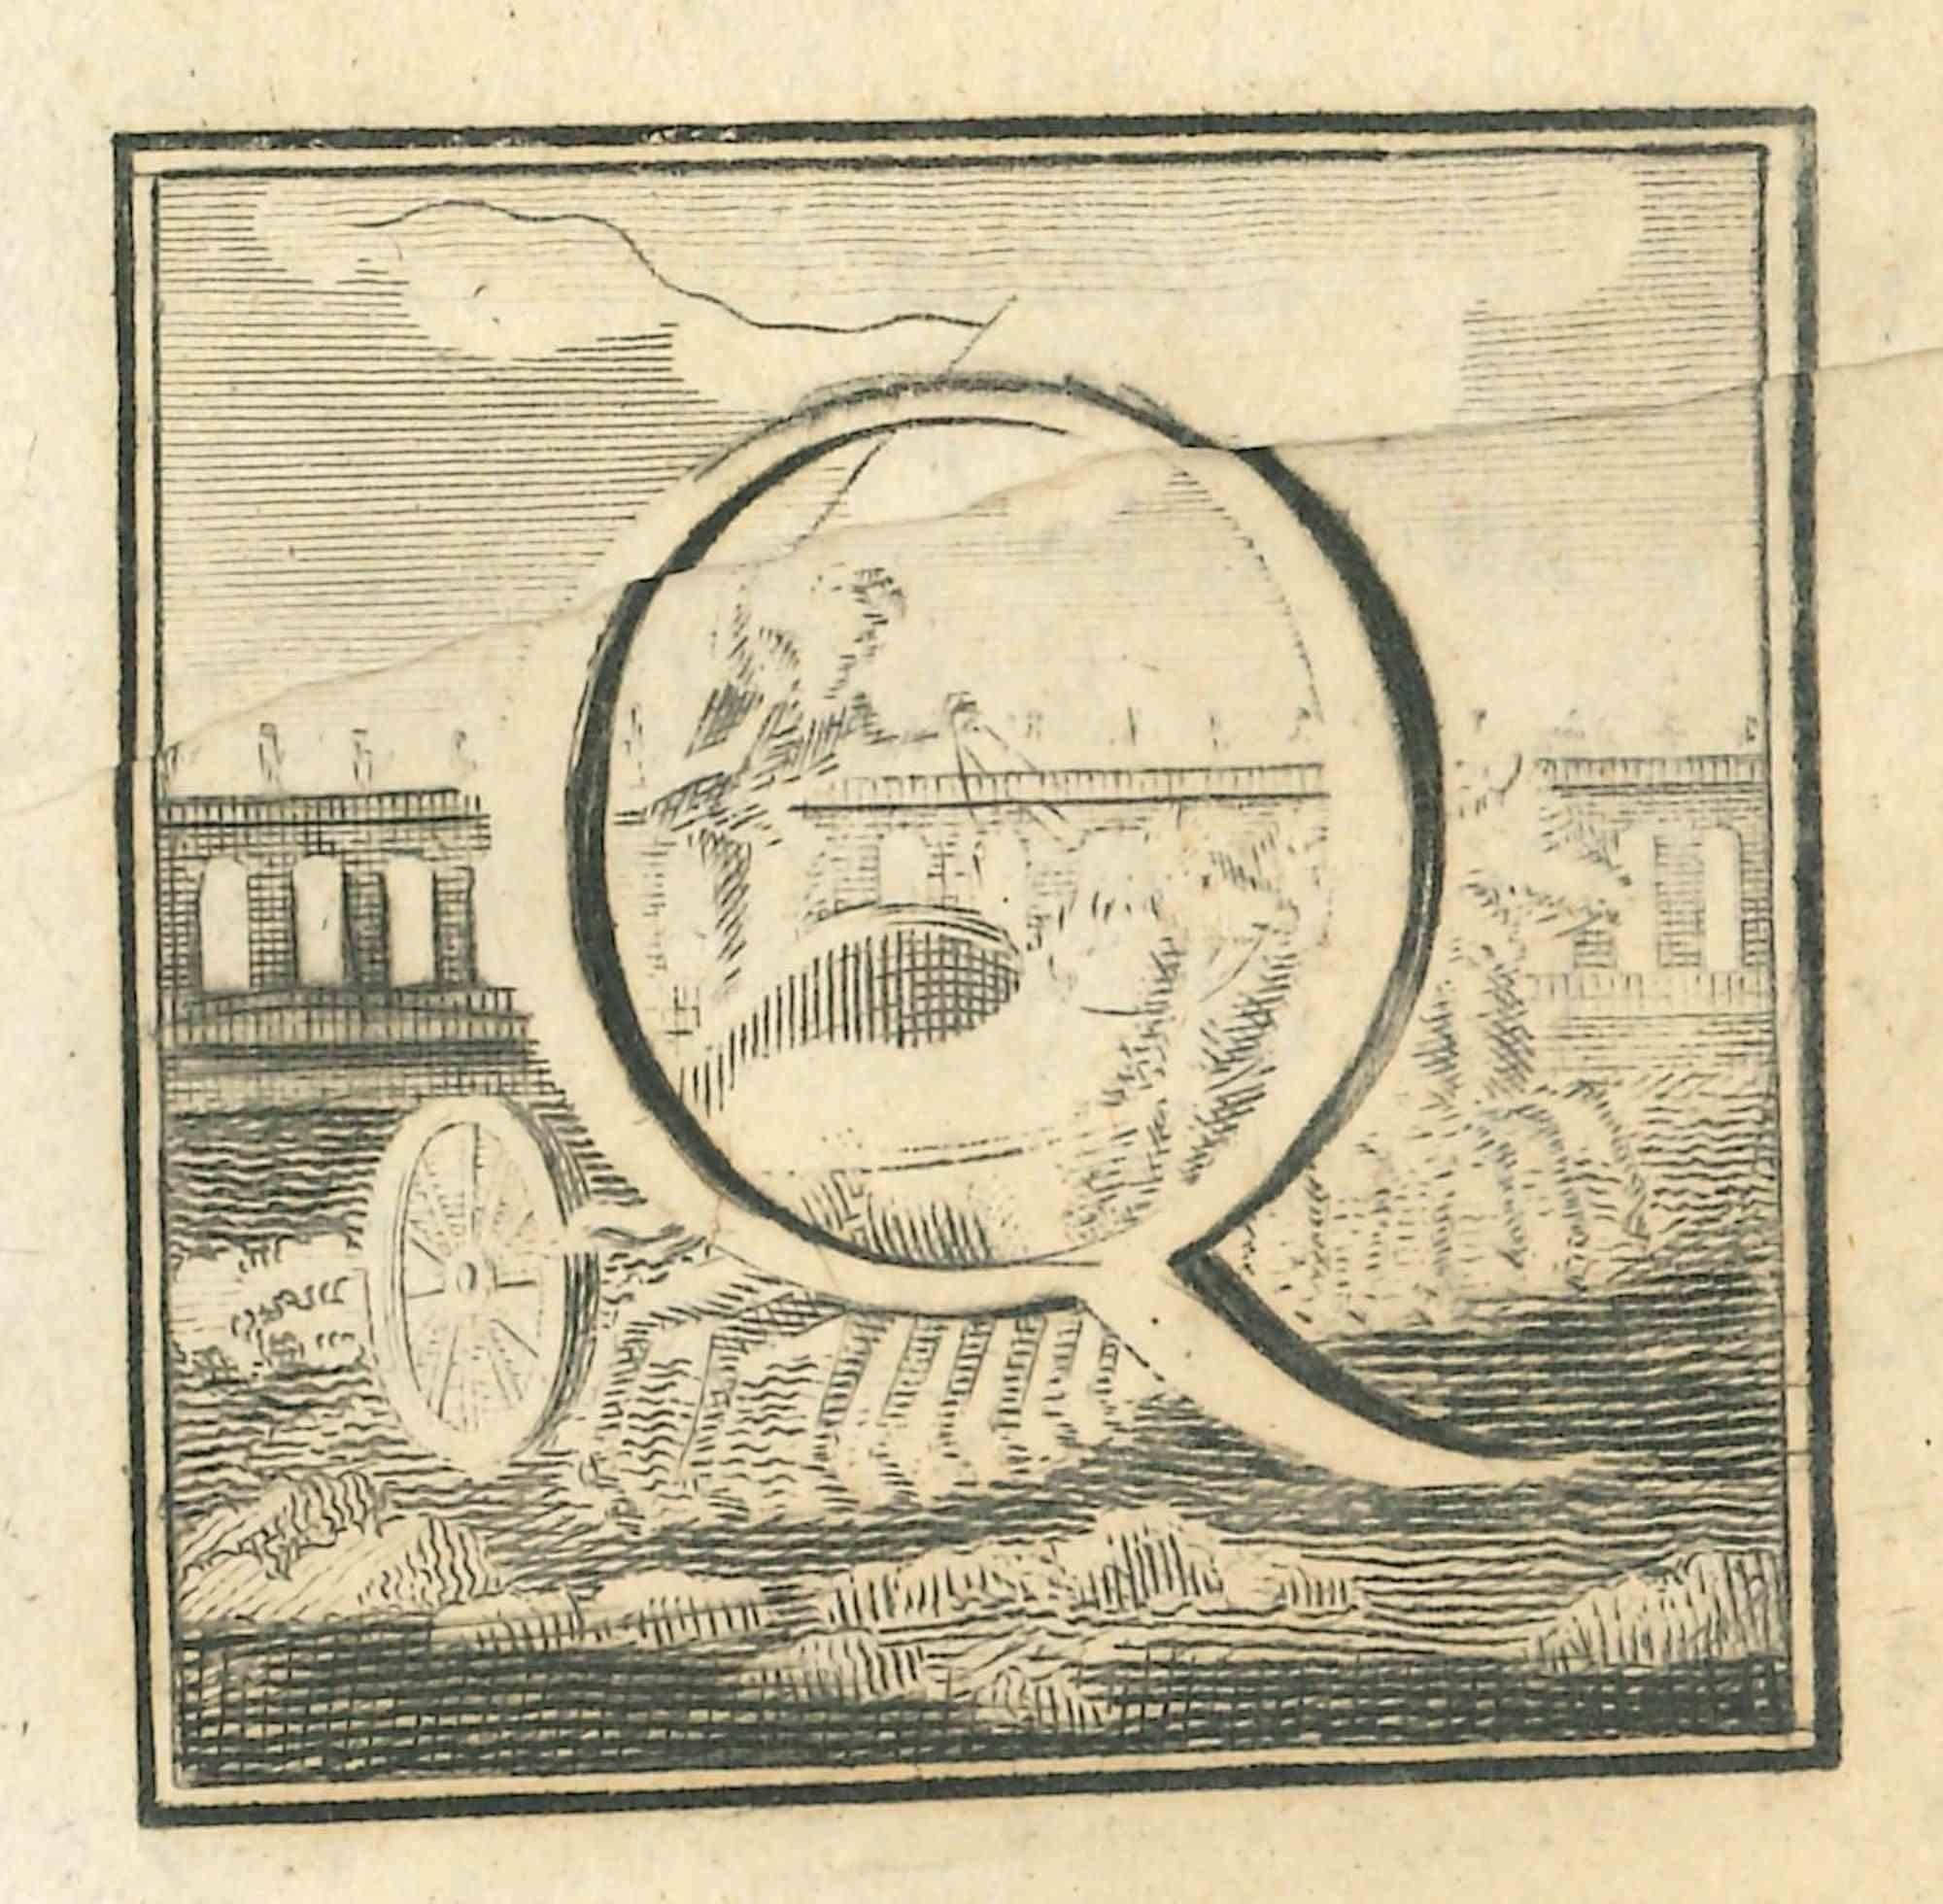 Unknown Figurative Print - Letter of the Alphabet Q -  Etching - 18th Century